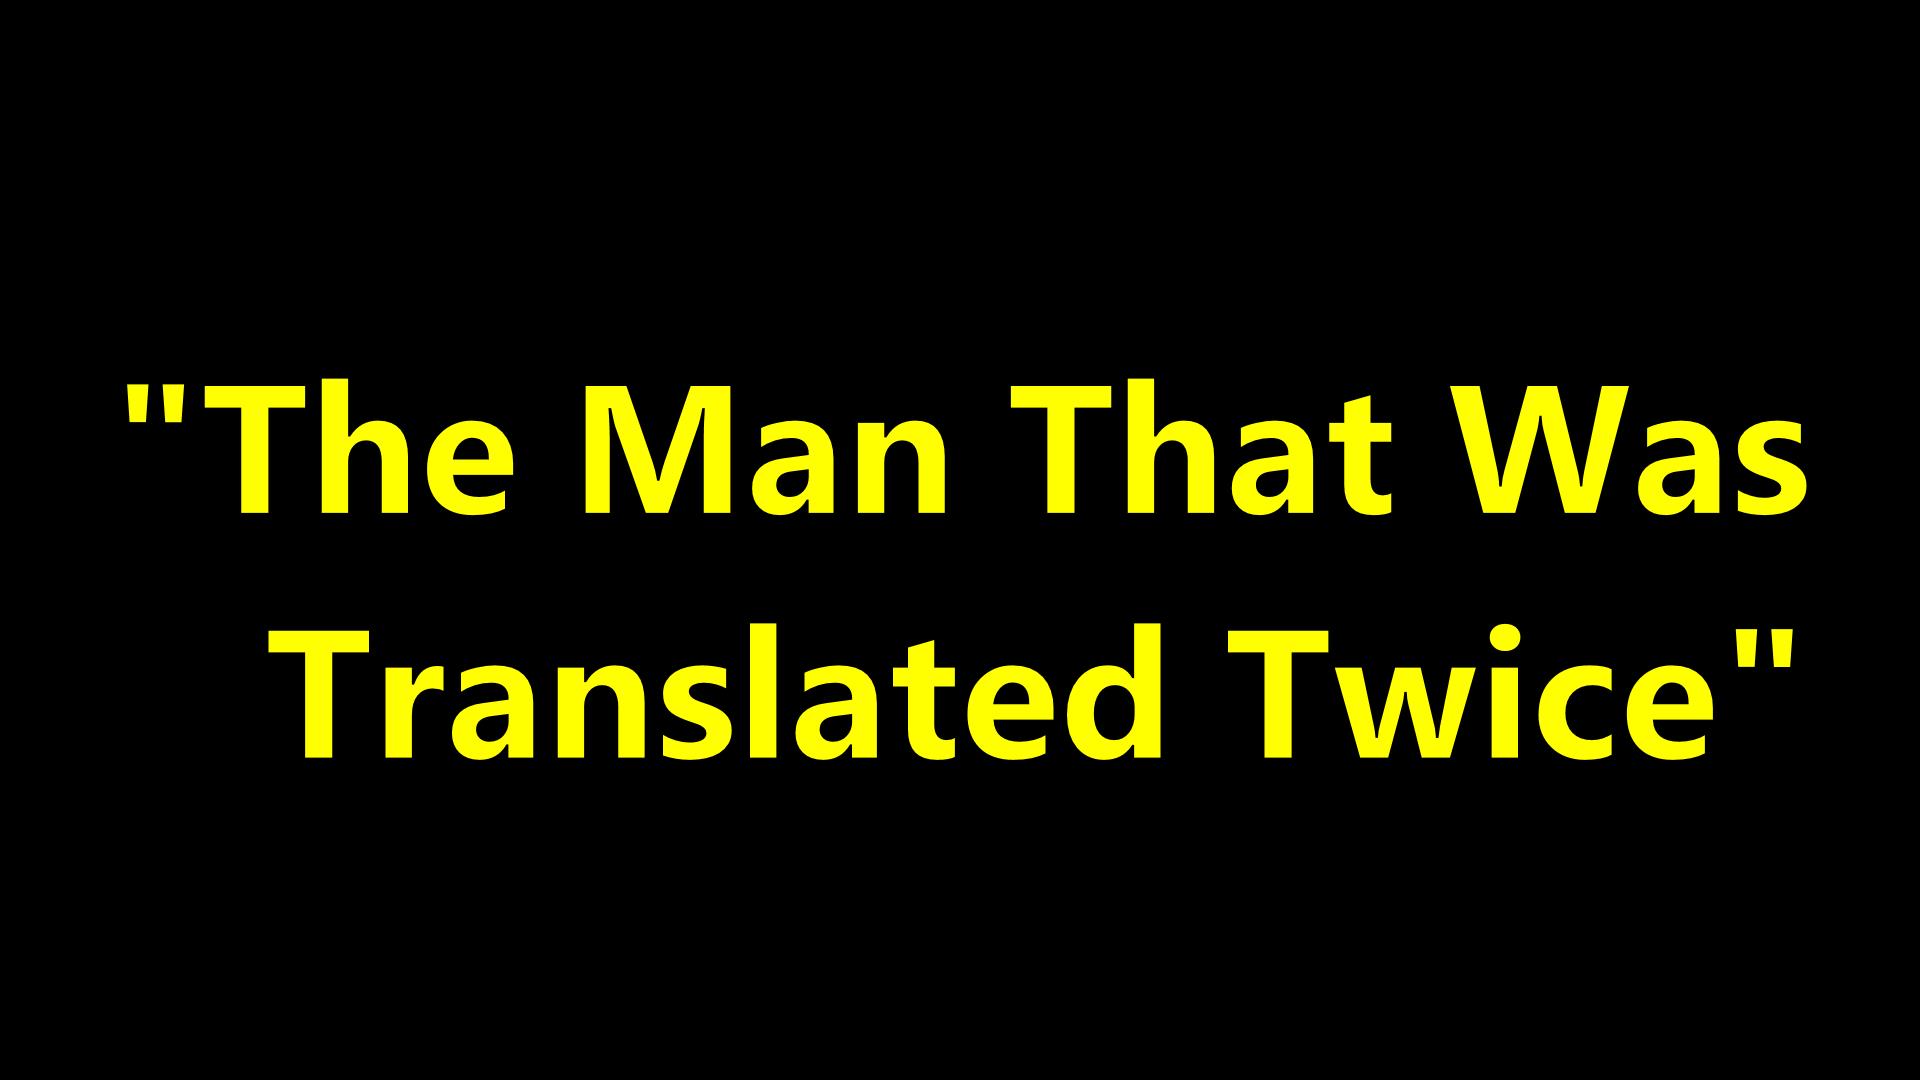 The Man That Was Translated Twice